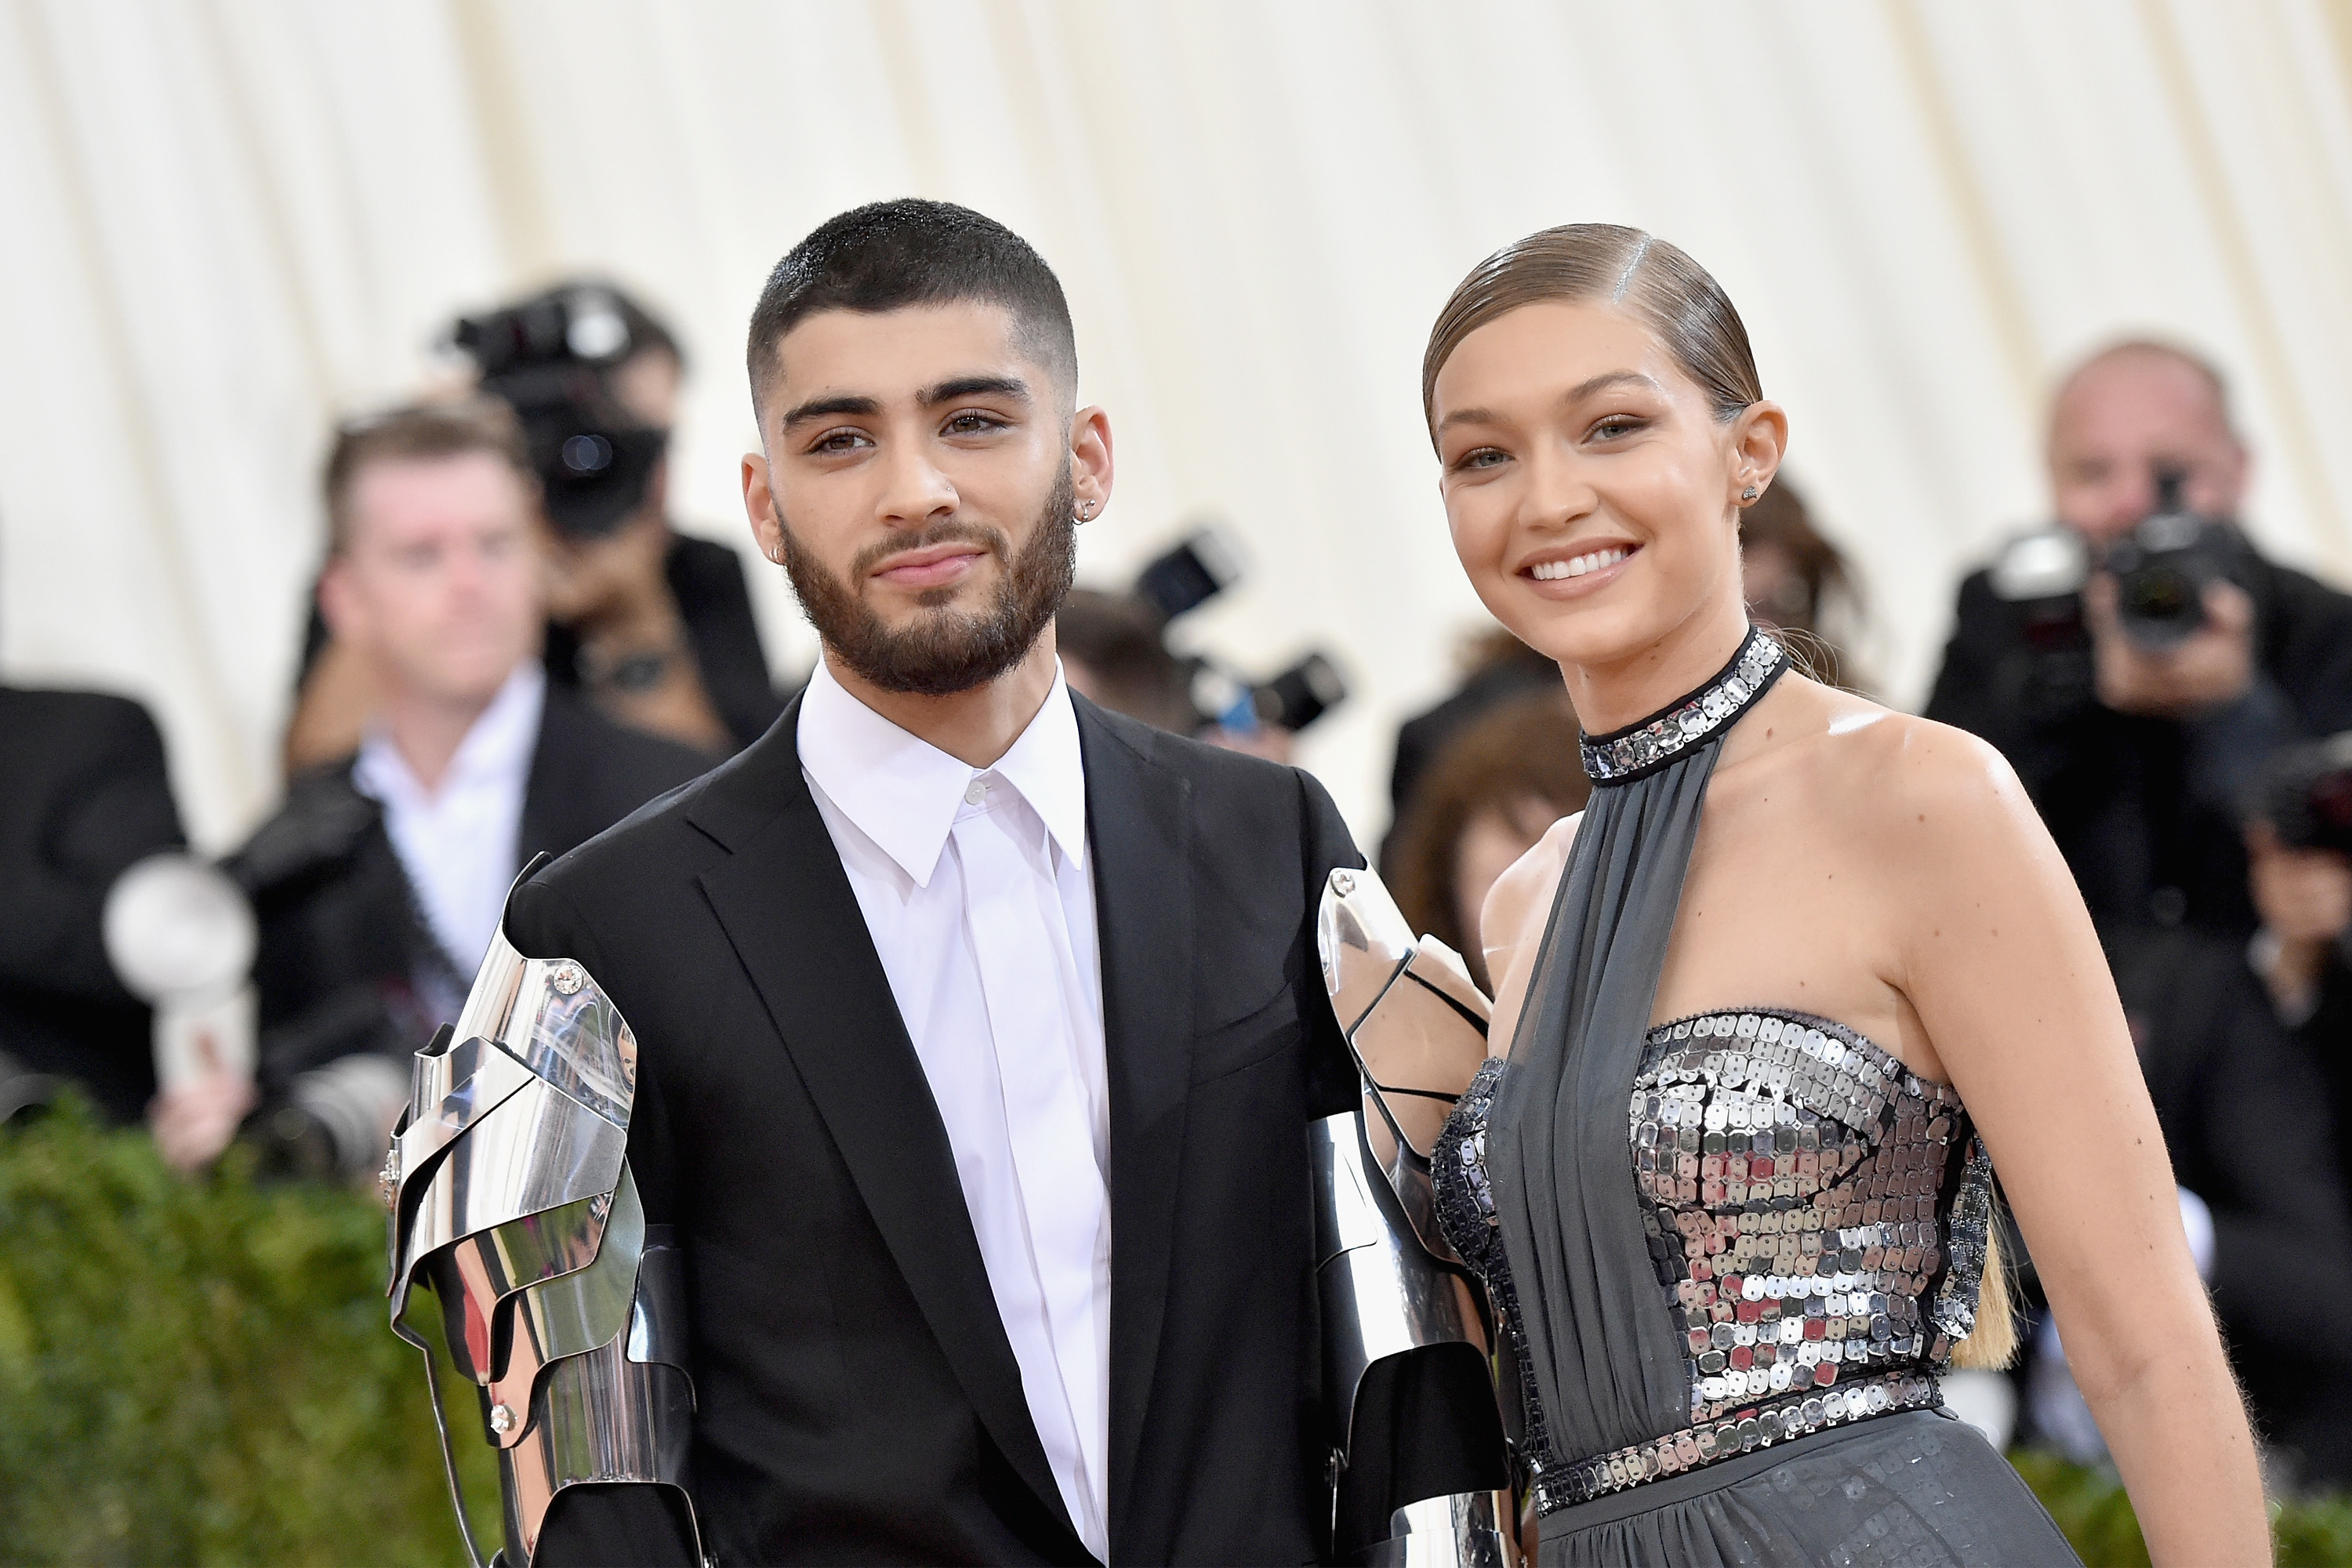 NEW YORK, NY - MAY 02:  Zayn Malik (L) and Gigi Hadid attend the "Manus x Machina: Fashion In An Age Of Technology" Costume Institute Gala at Metropolitan Museum of Art on May 2, 2016 in New York City.  (Photo by Mike Coppola/Getty Images for People.com) (Mike Coppola—Getty Images for People.com)